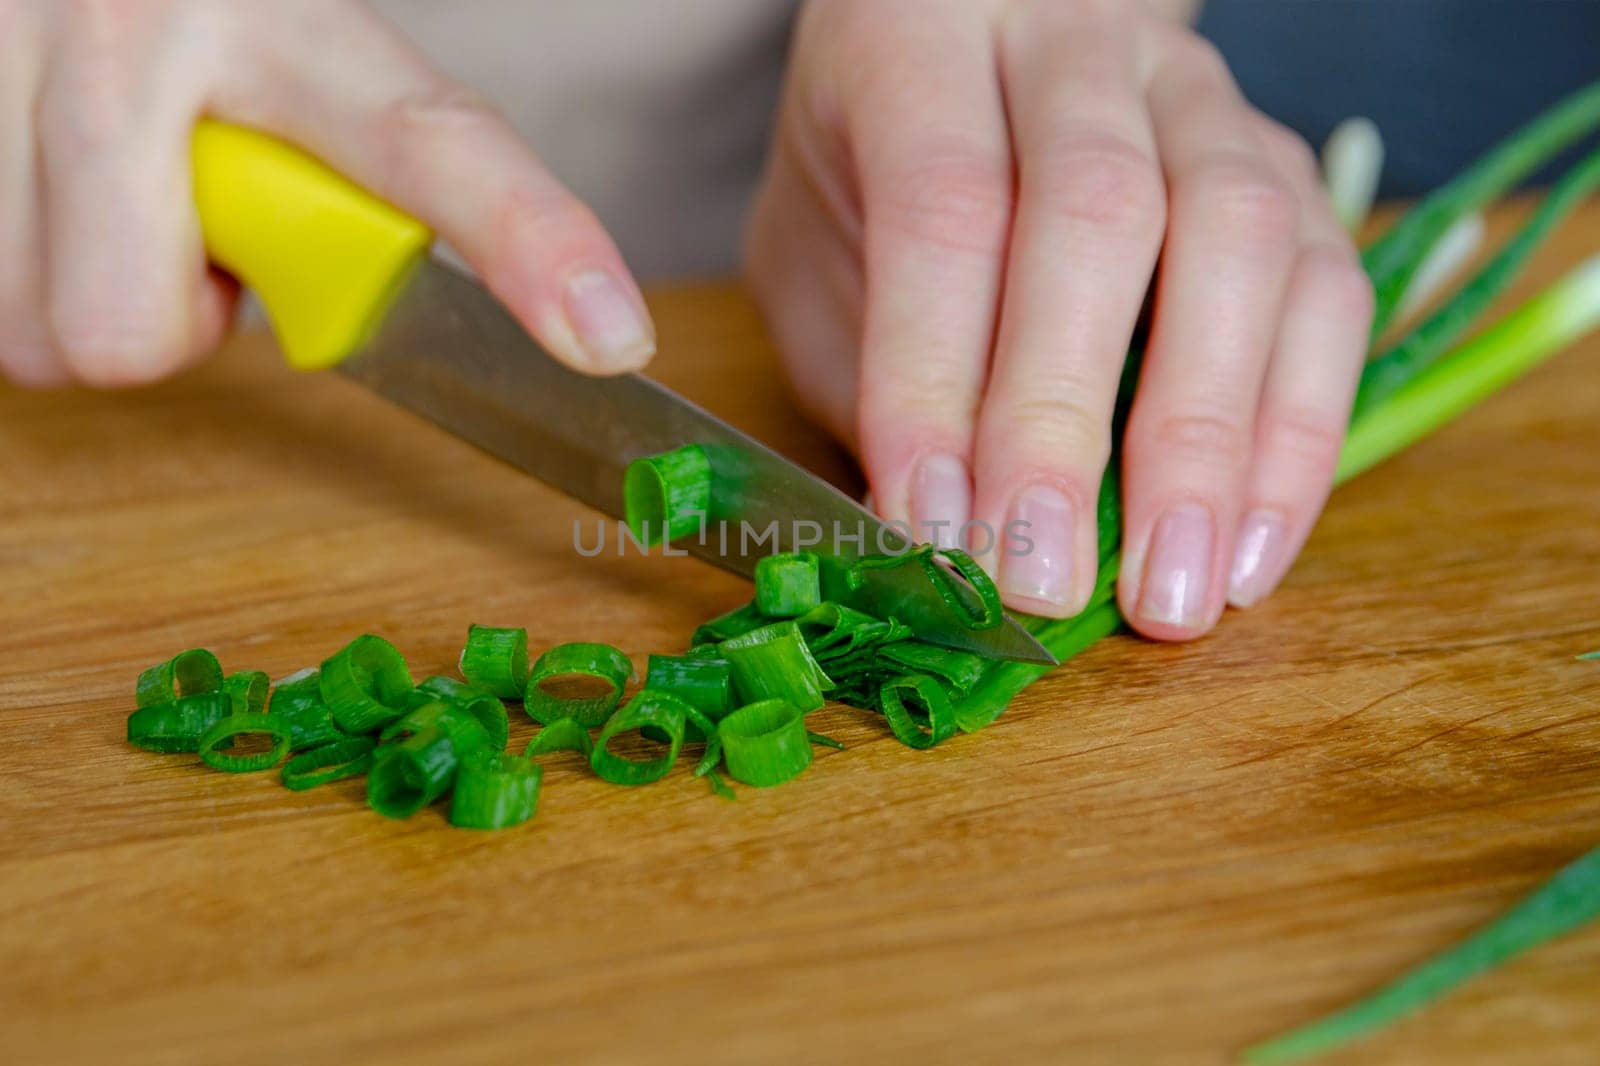 The process of preparing salad. A woman's hand chops a green onion close-up. Salad is used as a side dish for meals. High quality photo.